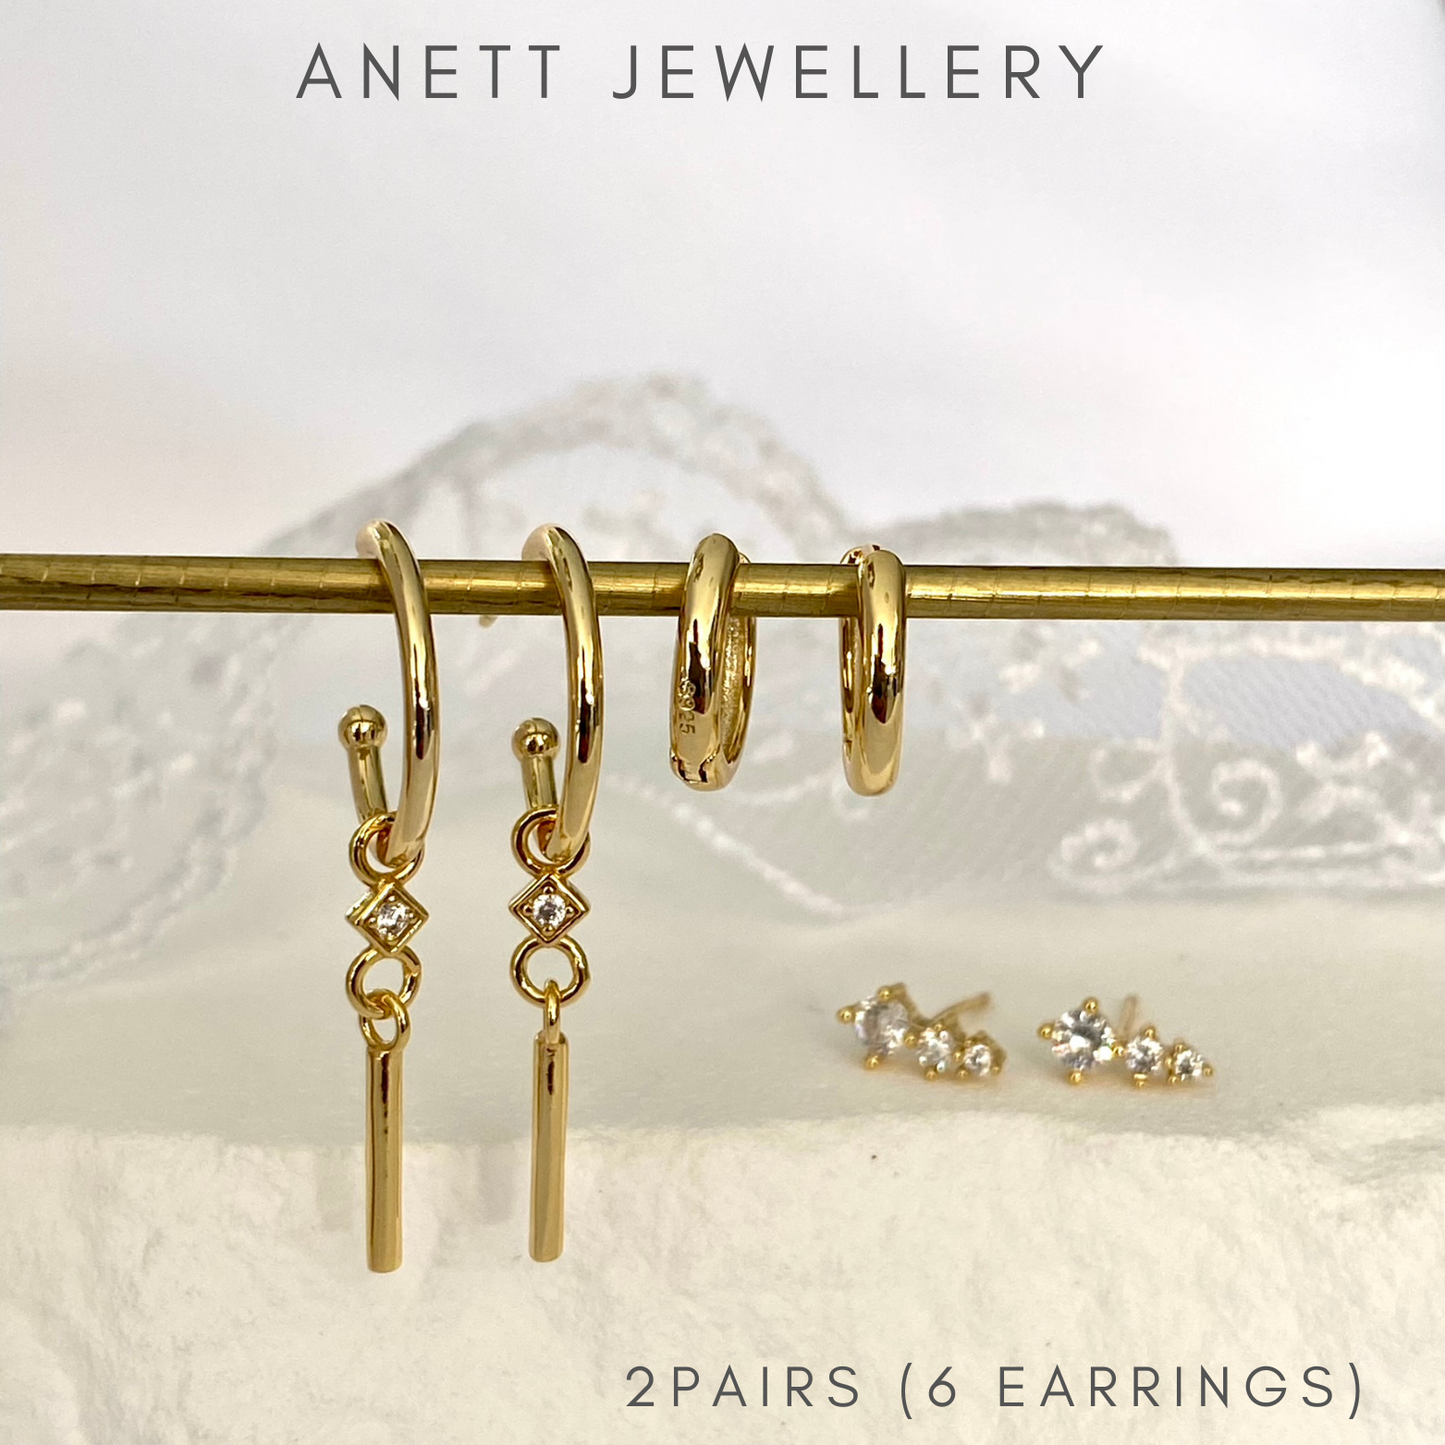 Dangly Ear Stack Set, 925 Sterling Silver 18k Gold Plated, Gold Huggie Hoop, Cubic Stud Earring, Gift for her, 3 pieces Gold Earring Set